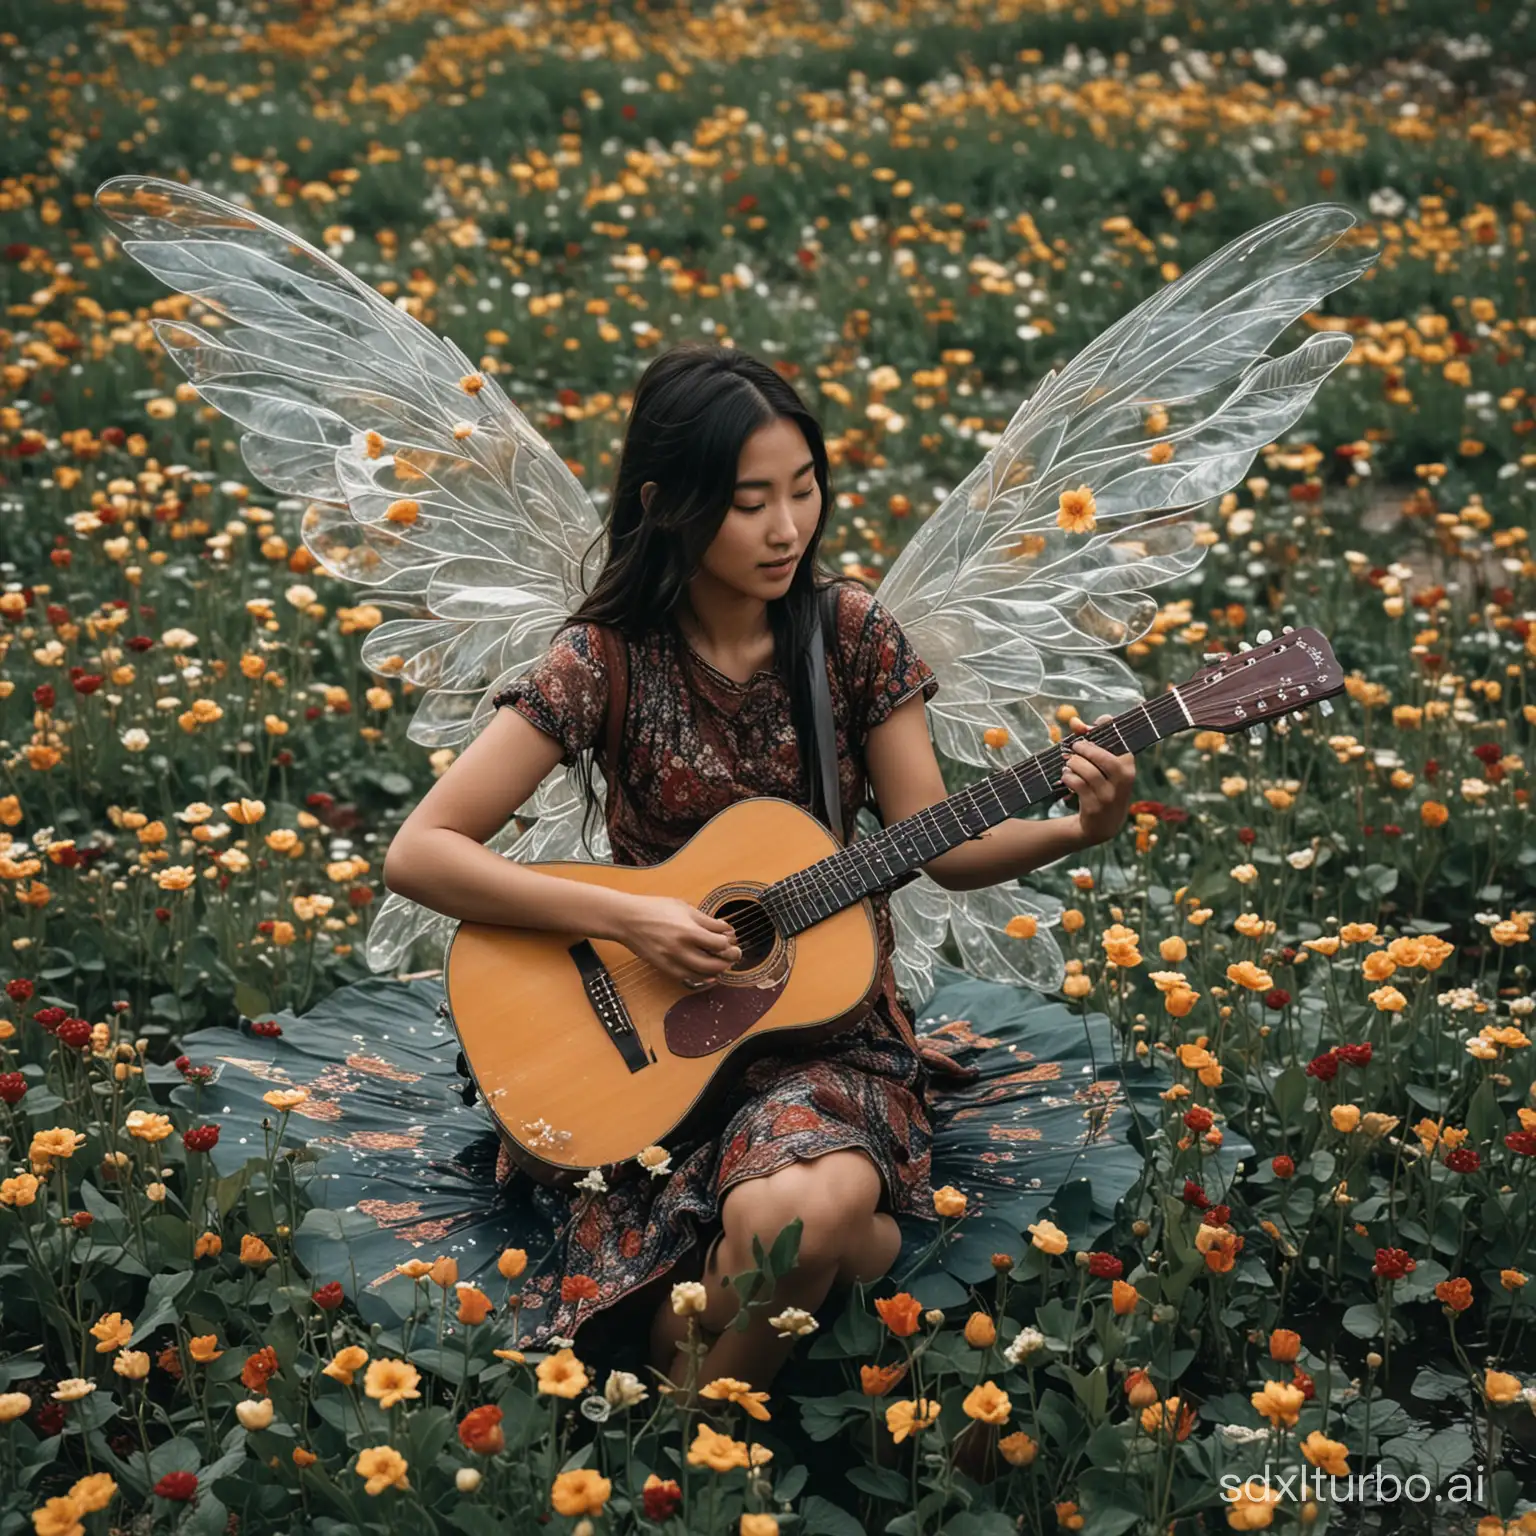 A girl floats in a sea of Tibetan flowers, playing the guitar, with a pair of transparent wings on her back.